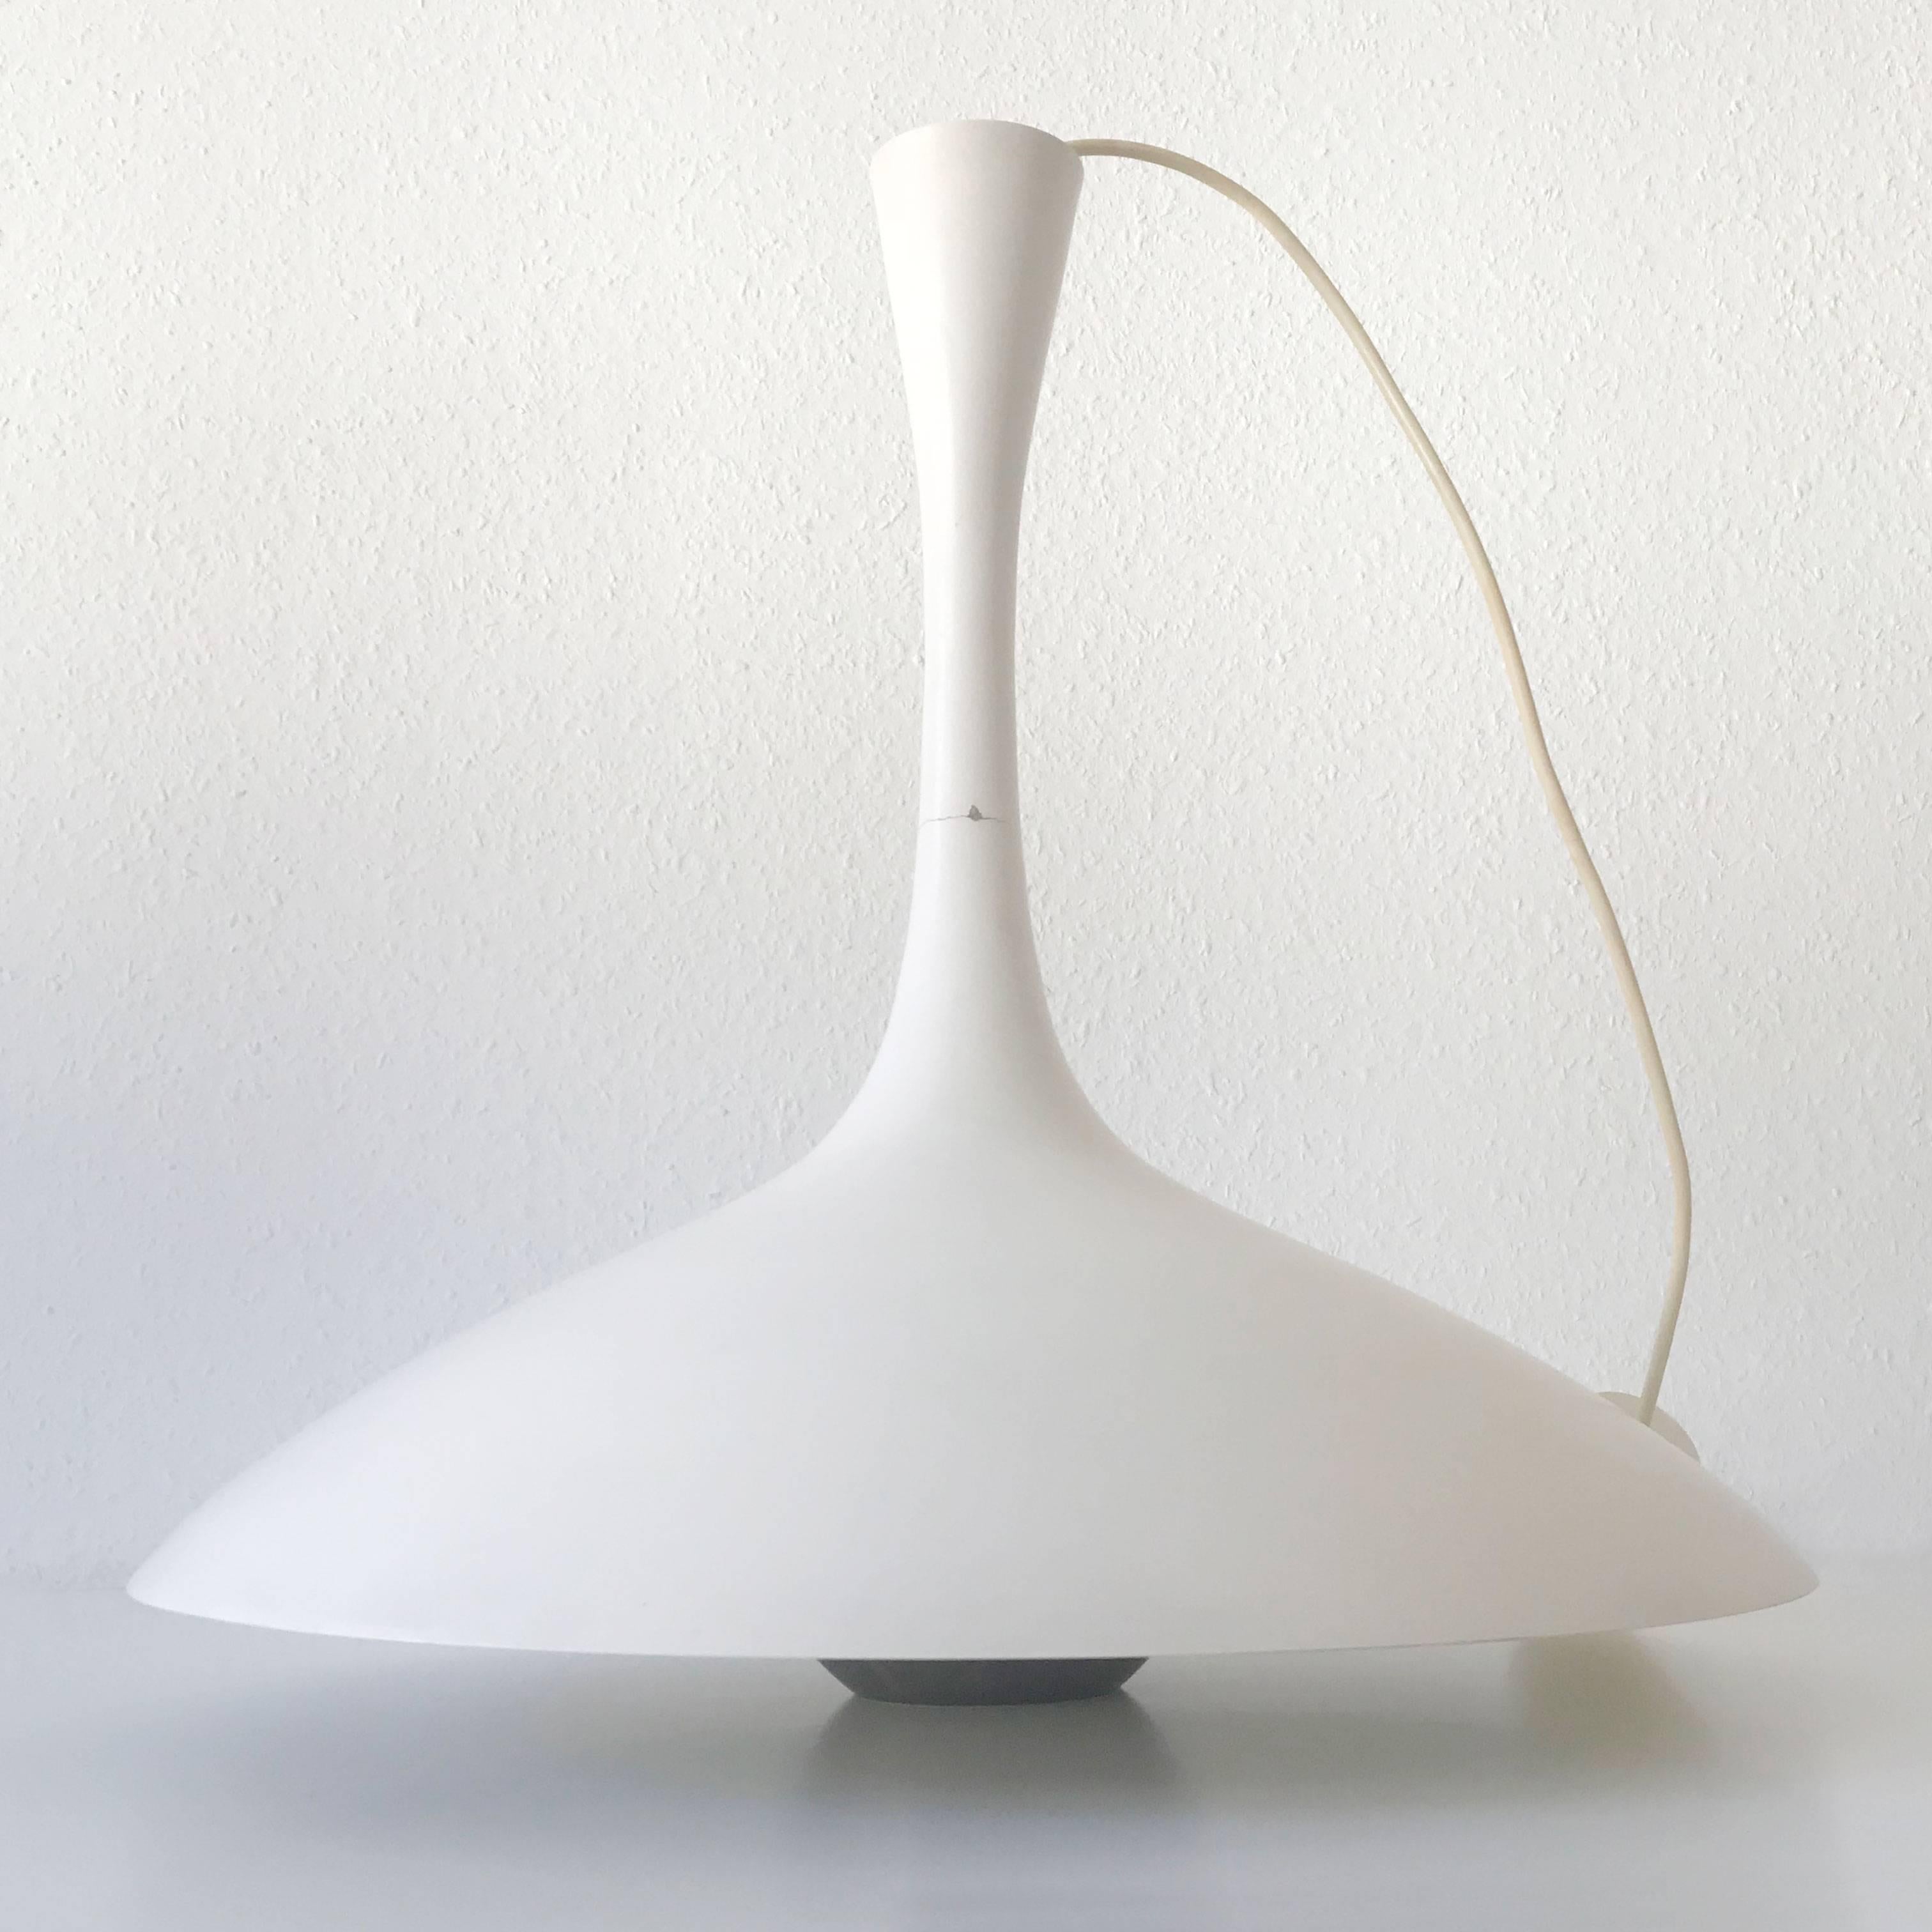 Brass Elegant Mid Century Modern Pendant Lamp or Hanging Light by Florian Schulz 1960s For Sale